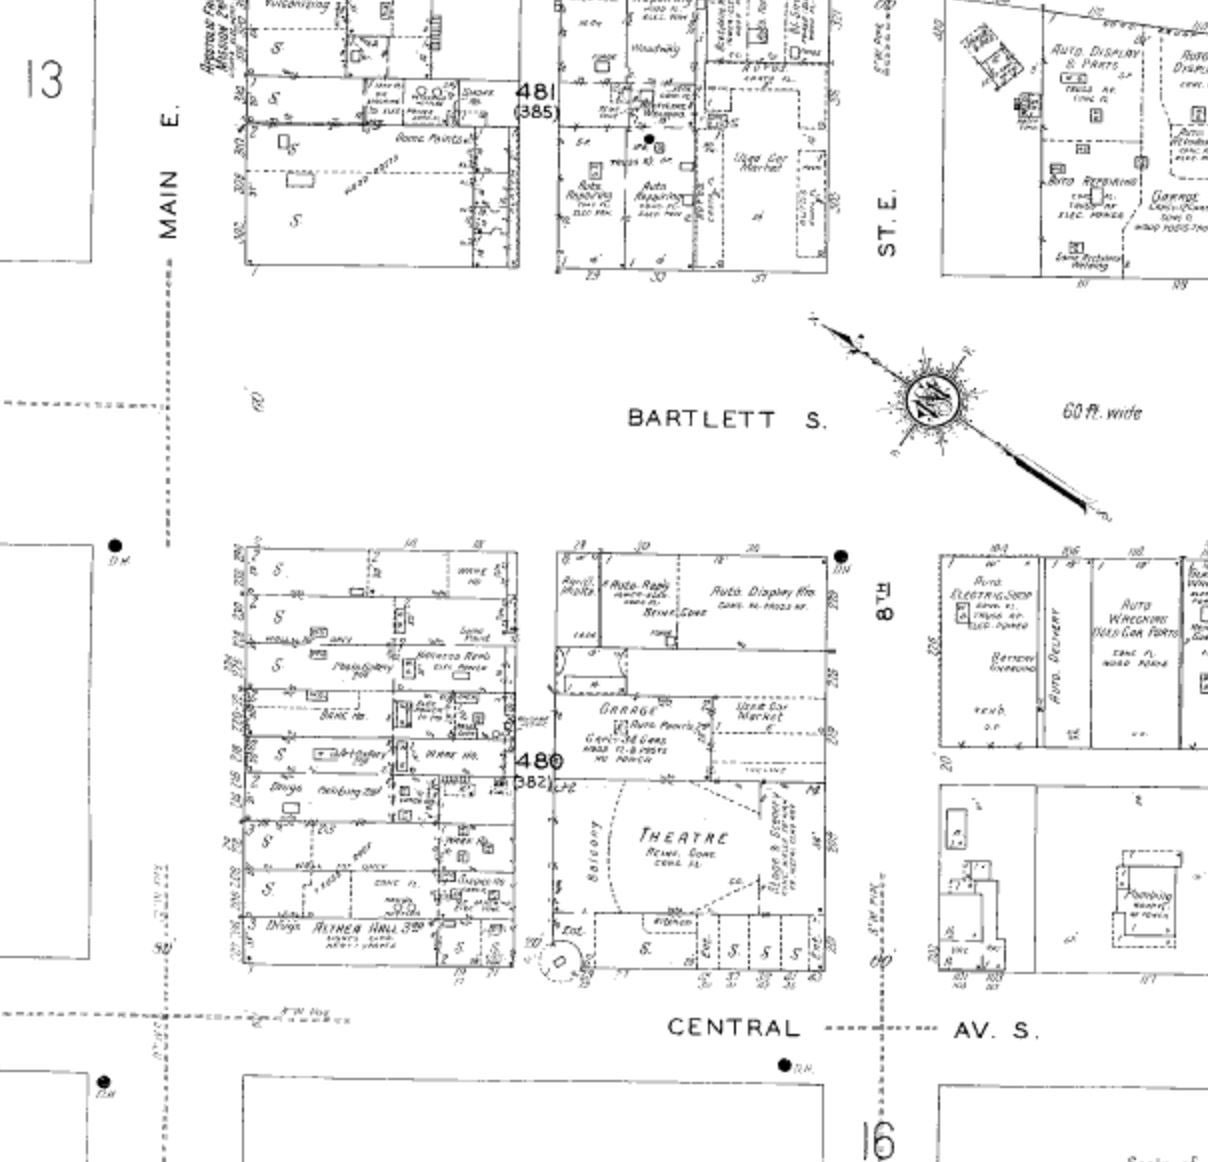 Sanborn Map of Craterian theater location, 1927